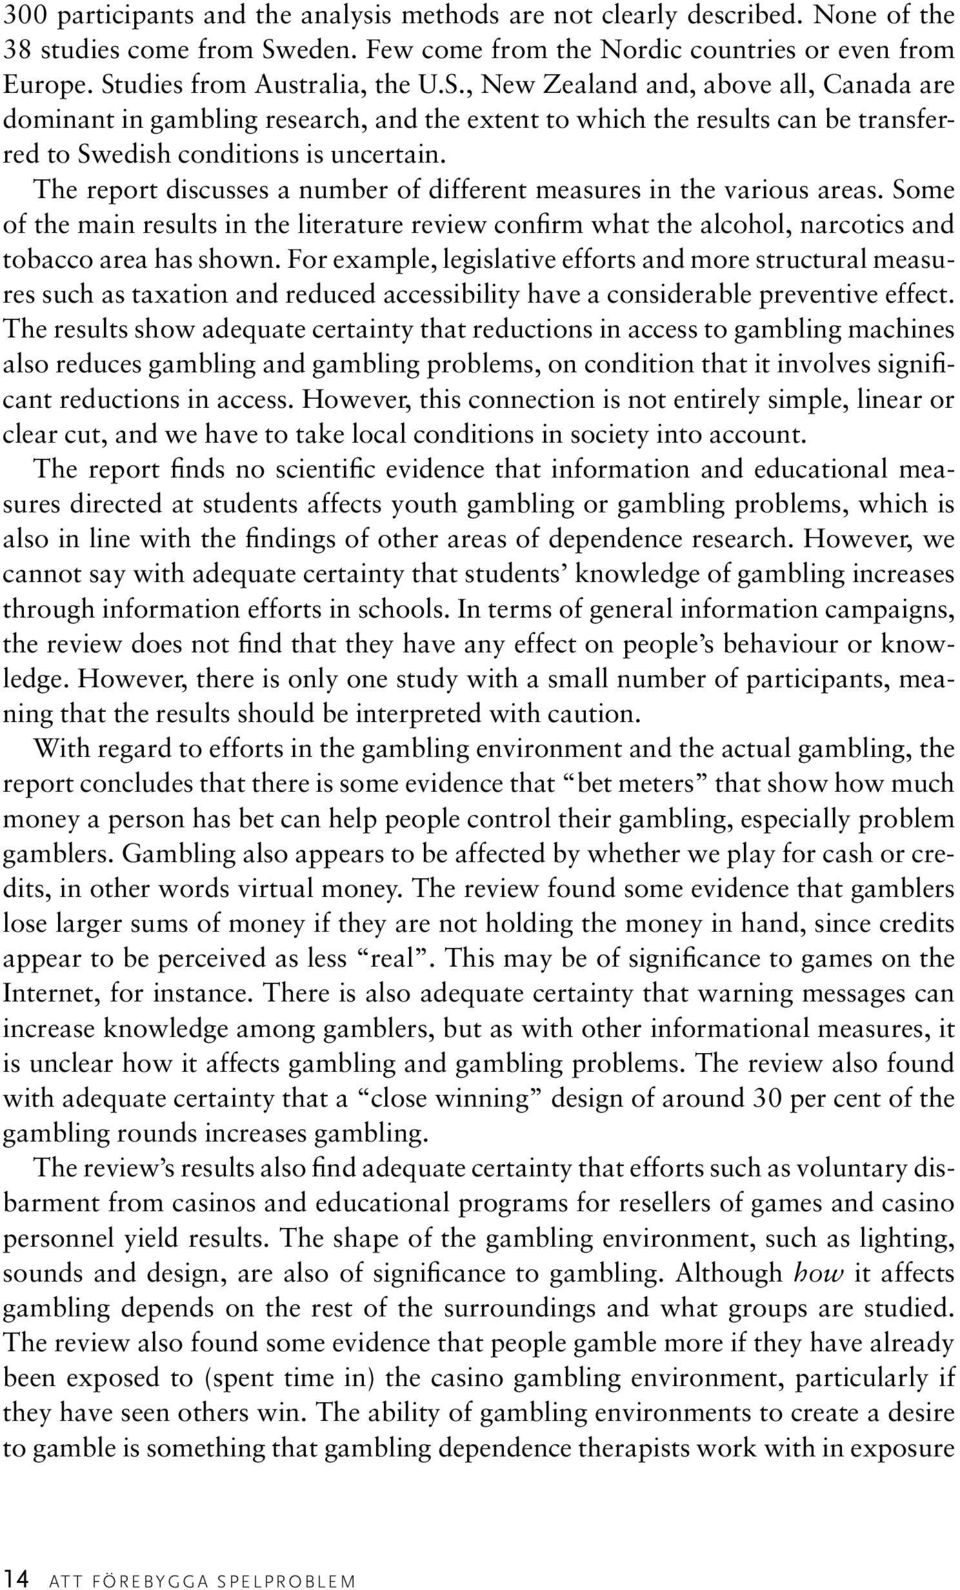 udies from Australia, the U.S., New Zealand and, above all, Canada are dominant in gambling research, and the extent to which the results can be transferred to Swedish conditions is uncertain.